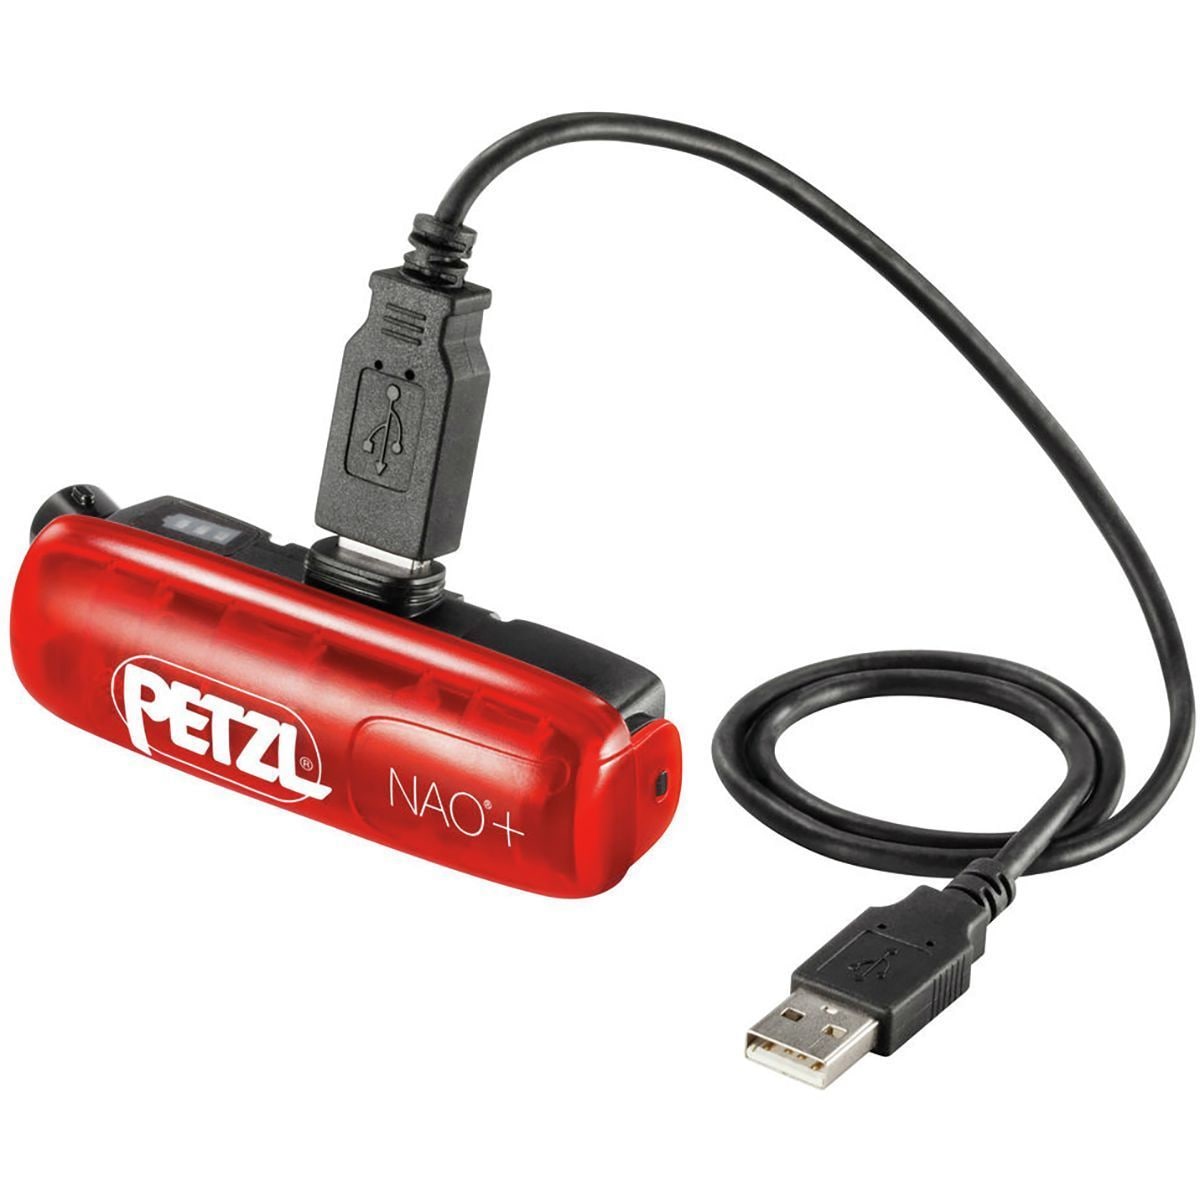 ACCU NAO+ Rechargeable Battery by Petzl